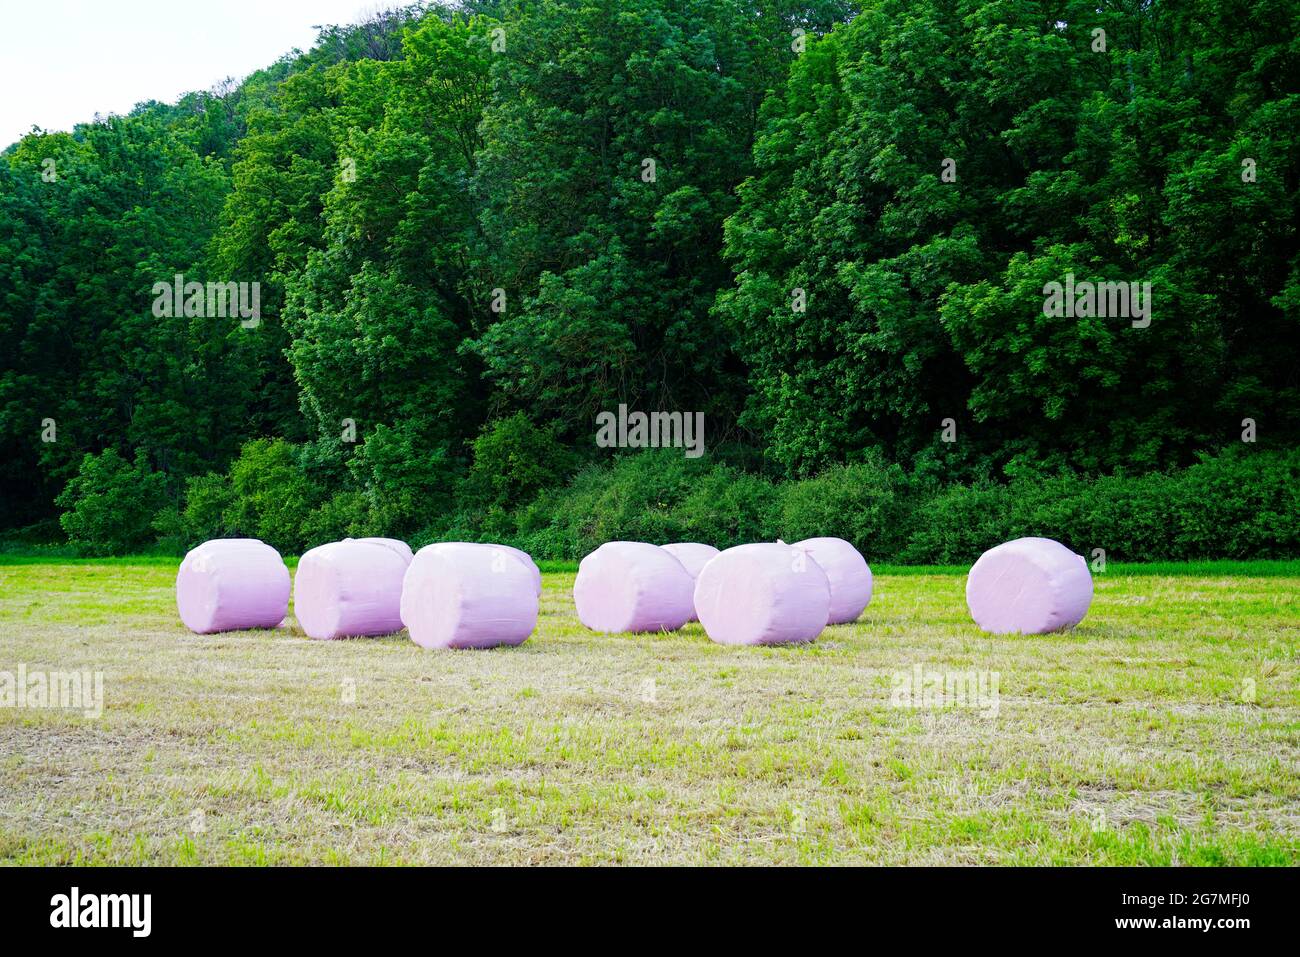 Silage bales in a field with a forest in the background. Rural environment. Feed for farm animals. Stock Photo